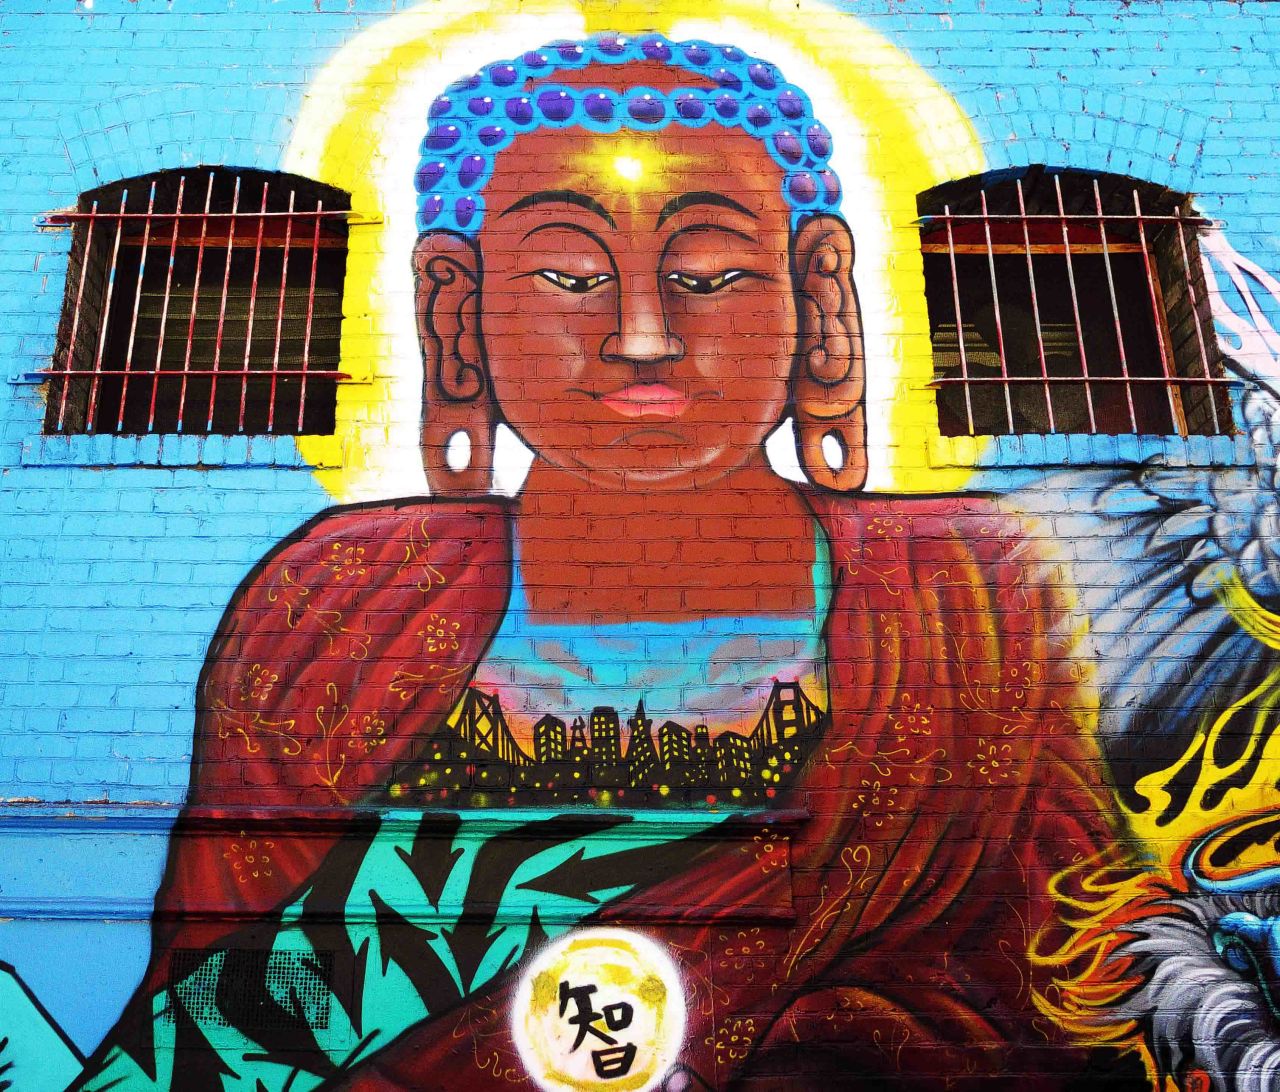 The brick walls of San Francisco's Chinatown are an ideal surface for muralists to display their art.